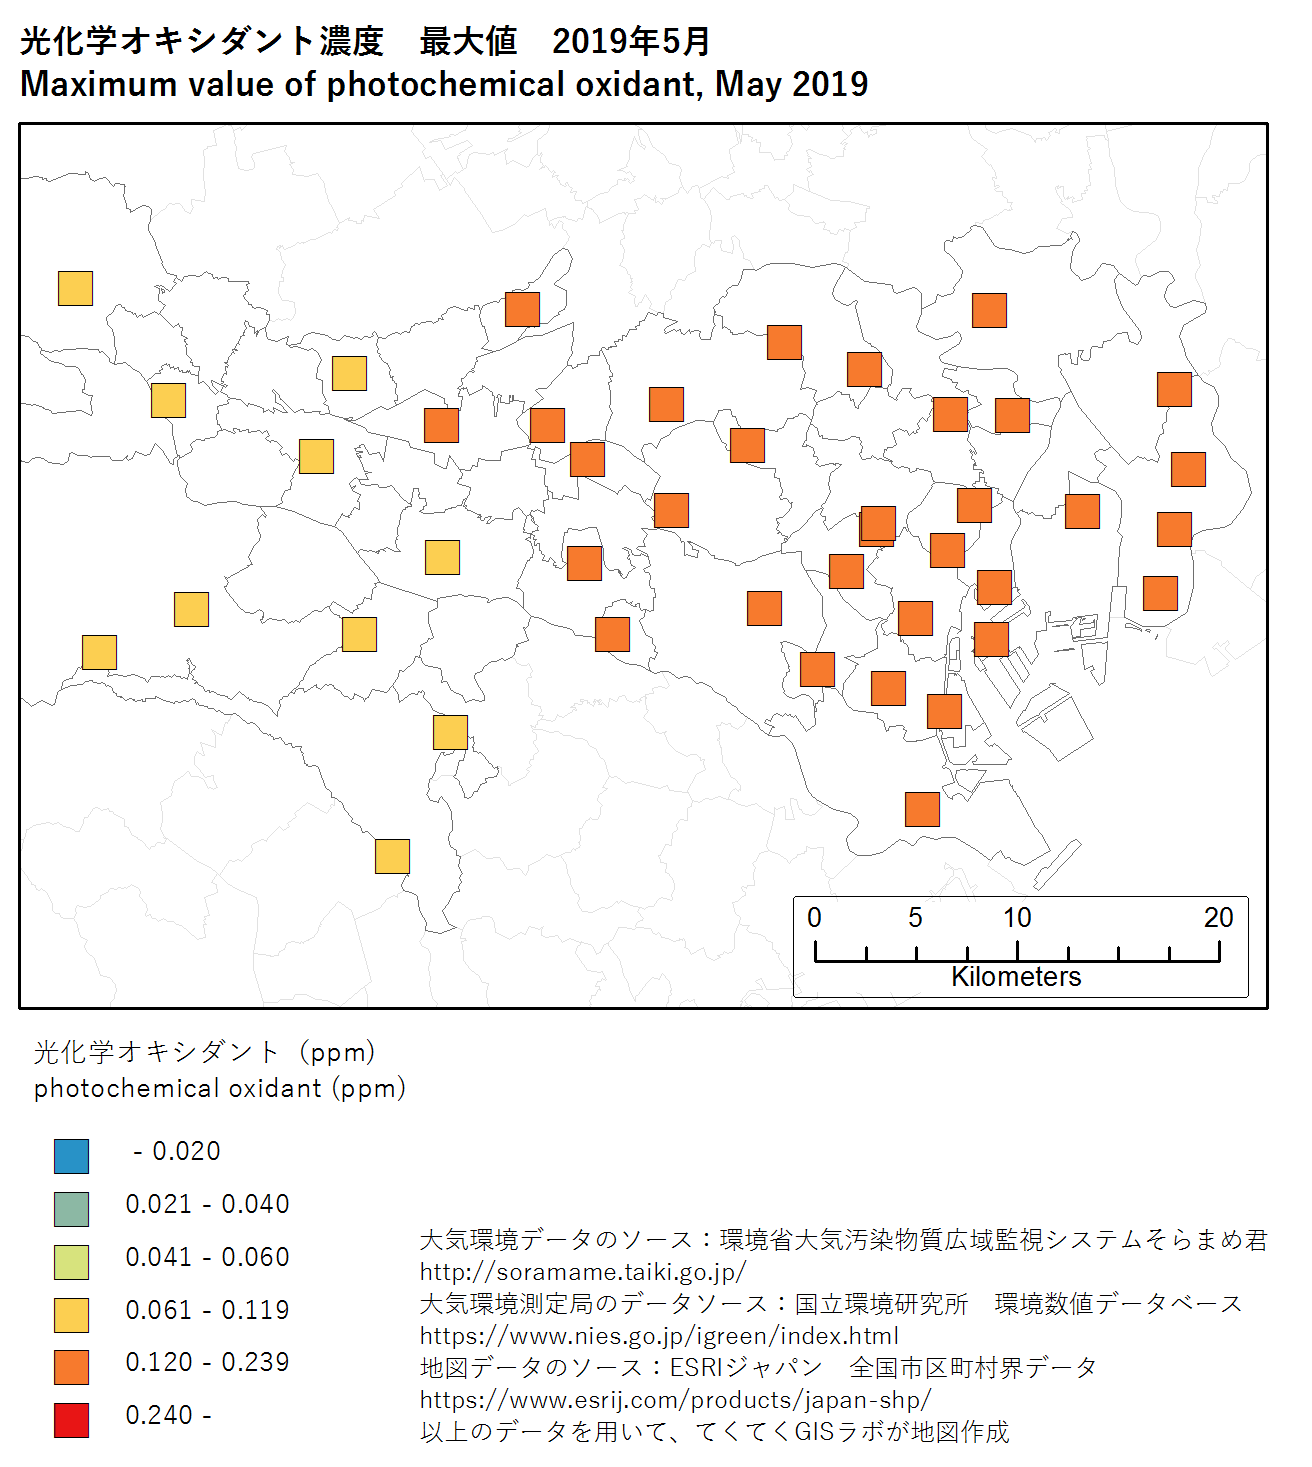 photochromic oxidant map (max) of Tokyo, May 2019